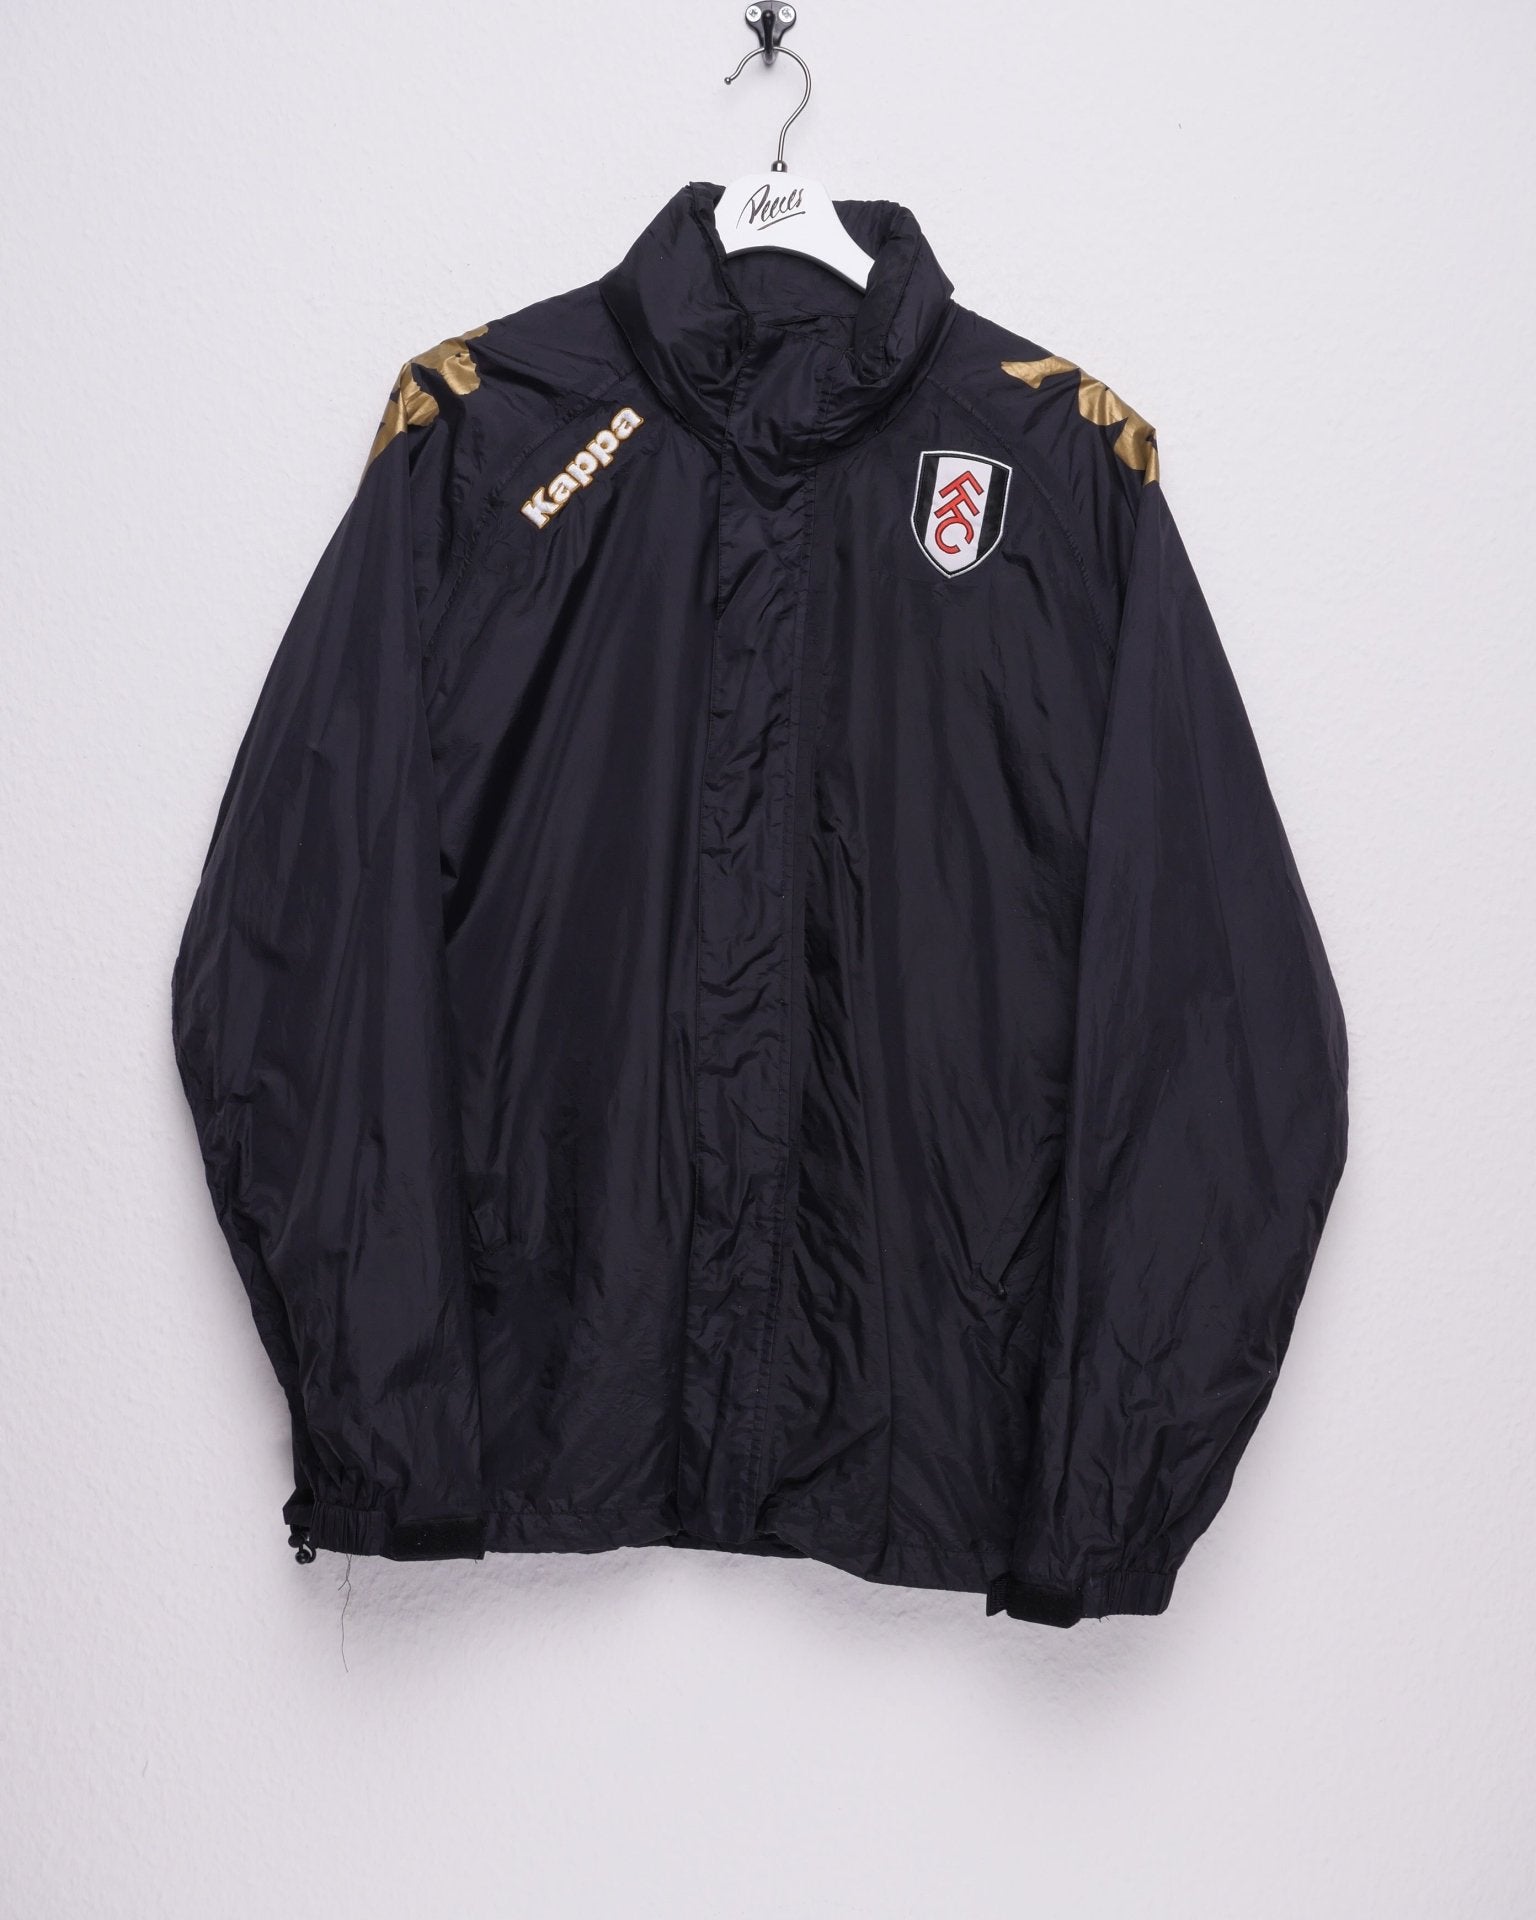 Kappa embroidered Spellout 'FFC' black Track Jacket - Peeces